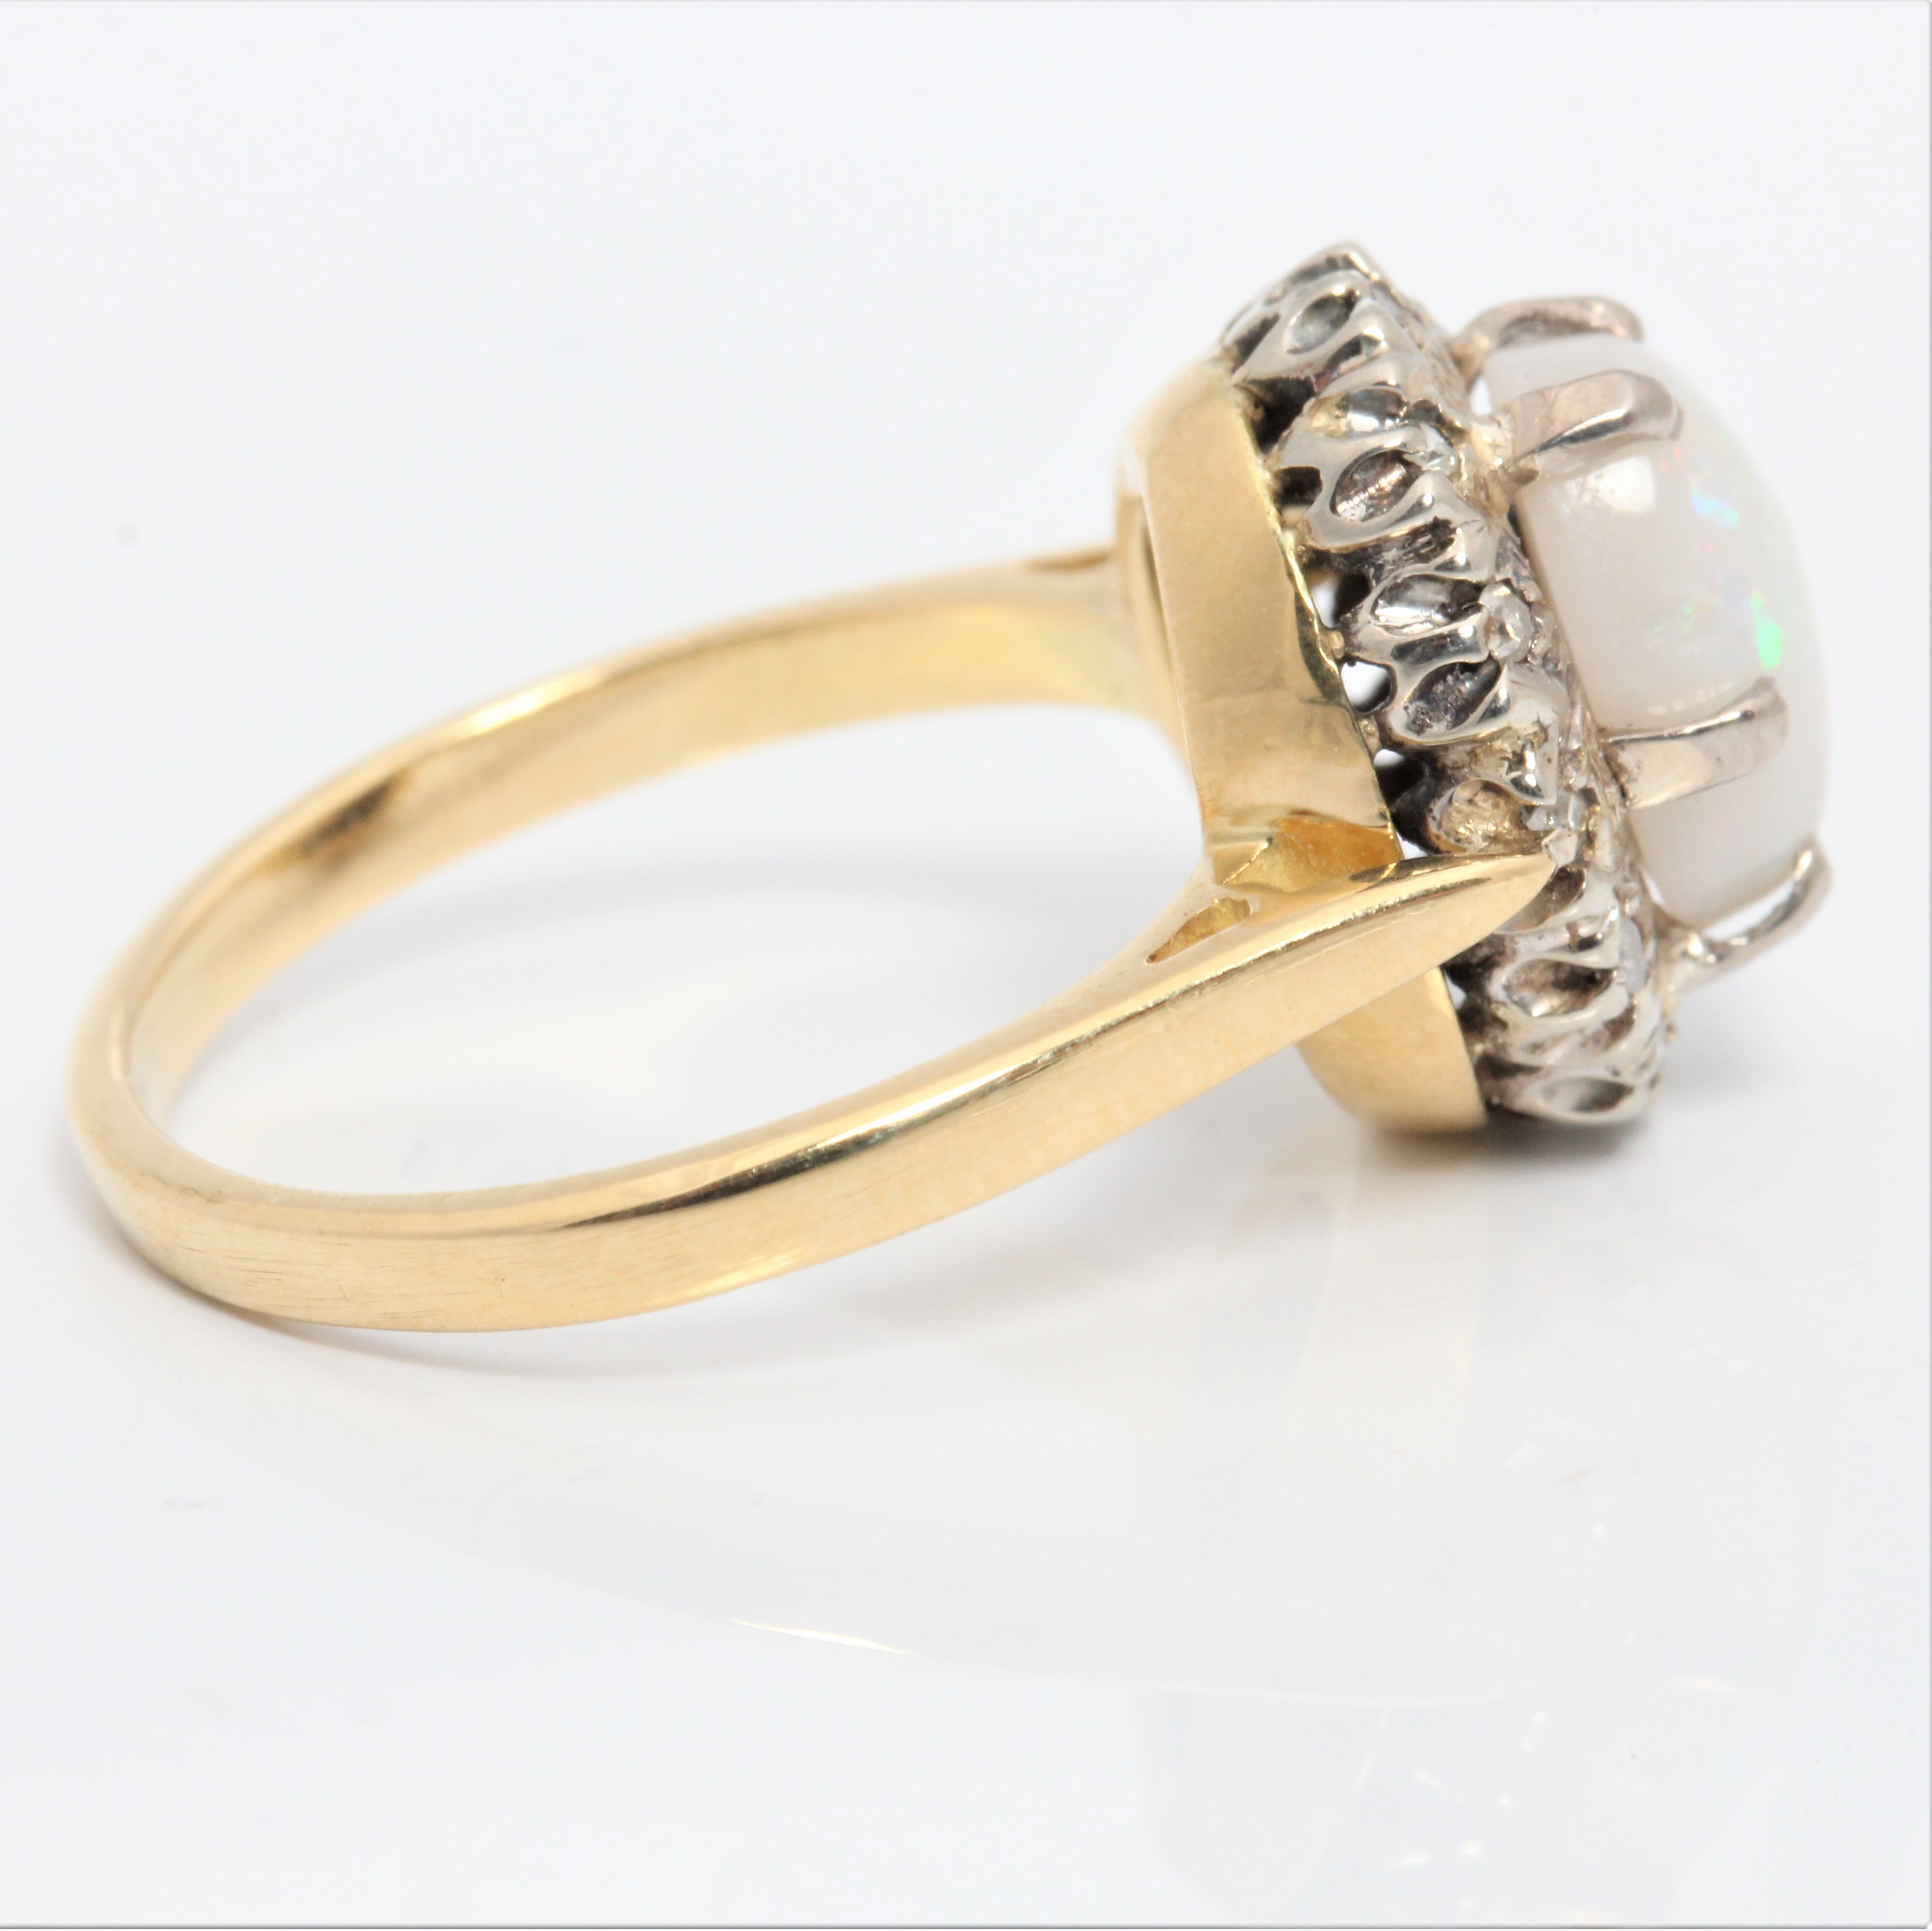 An opal and diamond cluster ring, set with an oval opal cabochon, measuring approx. 9x6mm, - Image 2 of 4